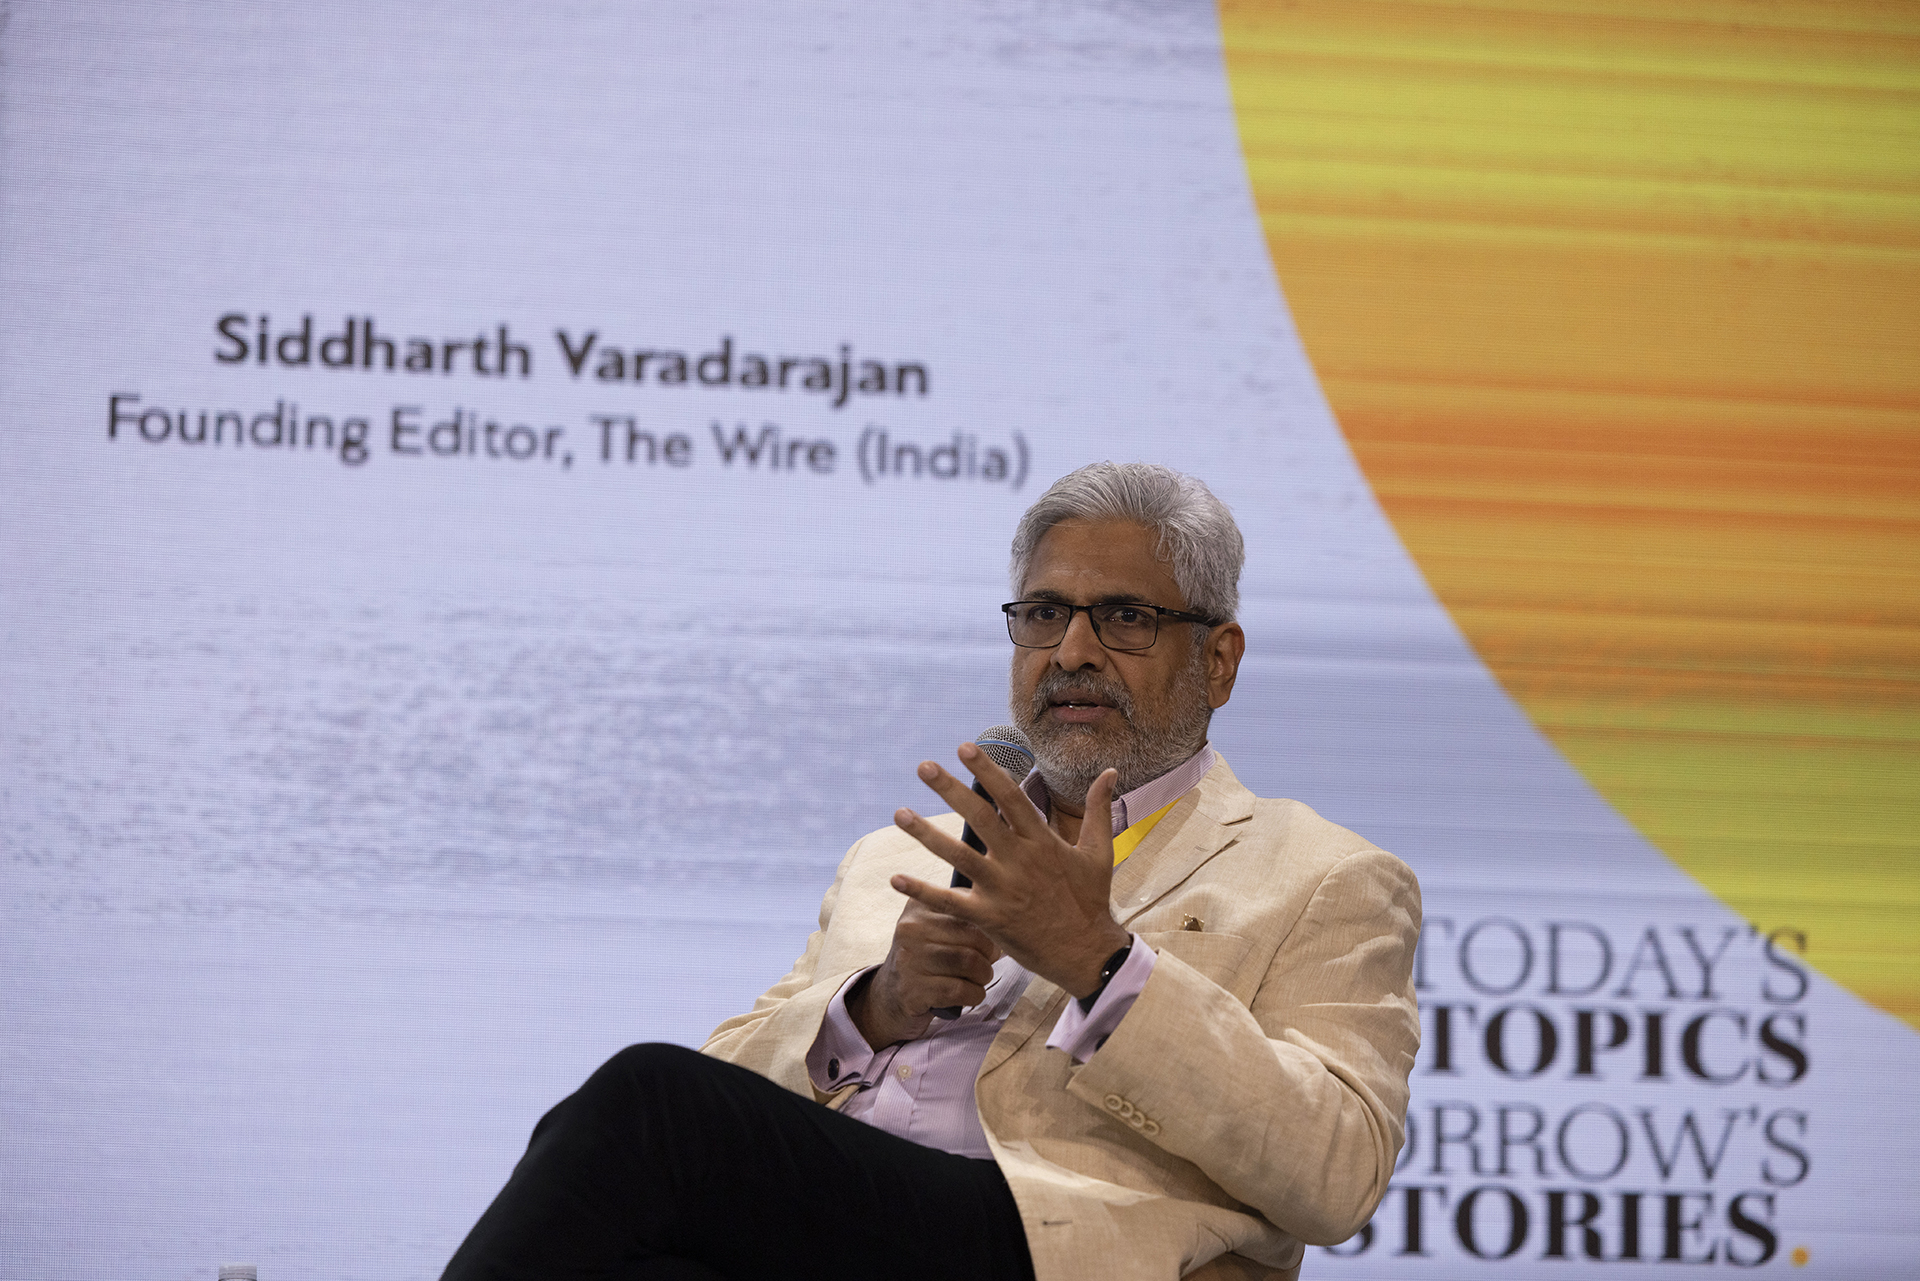 Siddharth Varadarajan, Founding Editor at The Wire, at the panel “Sustainability models in an era of digital revolution” during  iMEdD International Journalism Forum 2023. He sits on a chair on stage holding a hand-held  microphone and raising his hand as a sign of determination and intensity. On the background screen stands his name and title.